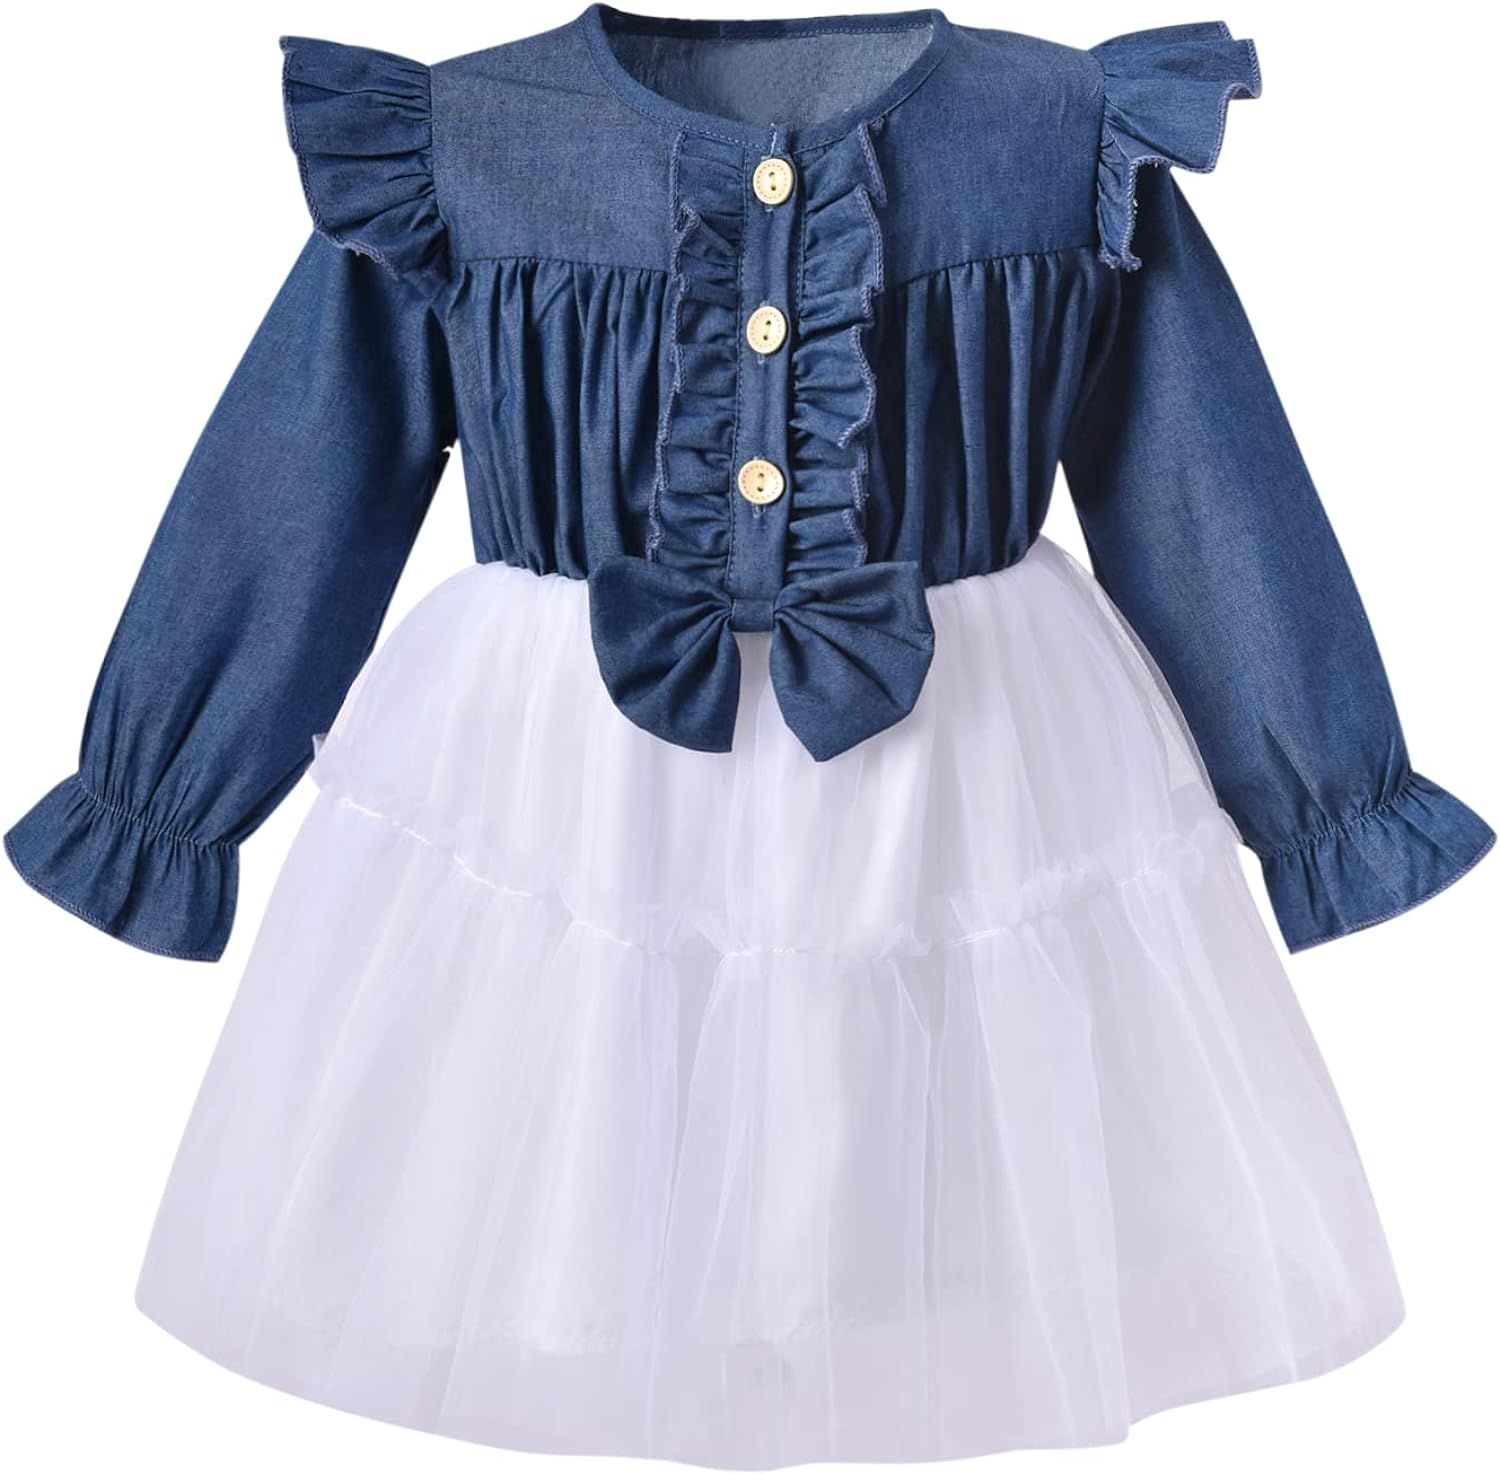 MINIFEIKO Toddler Baby Girl Denim Bowknot Dress Ruffled Button Dresses Spring Summer Outfit | Amazon (US)